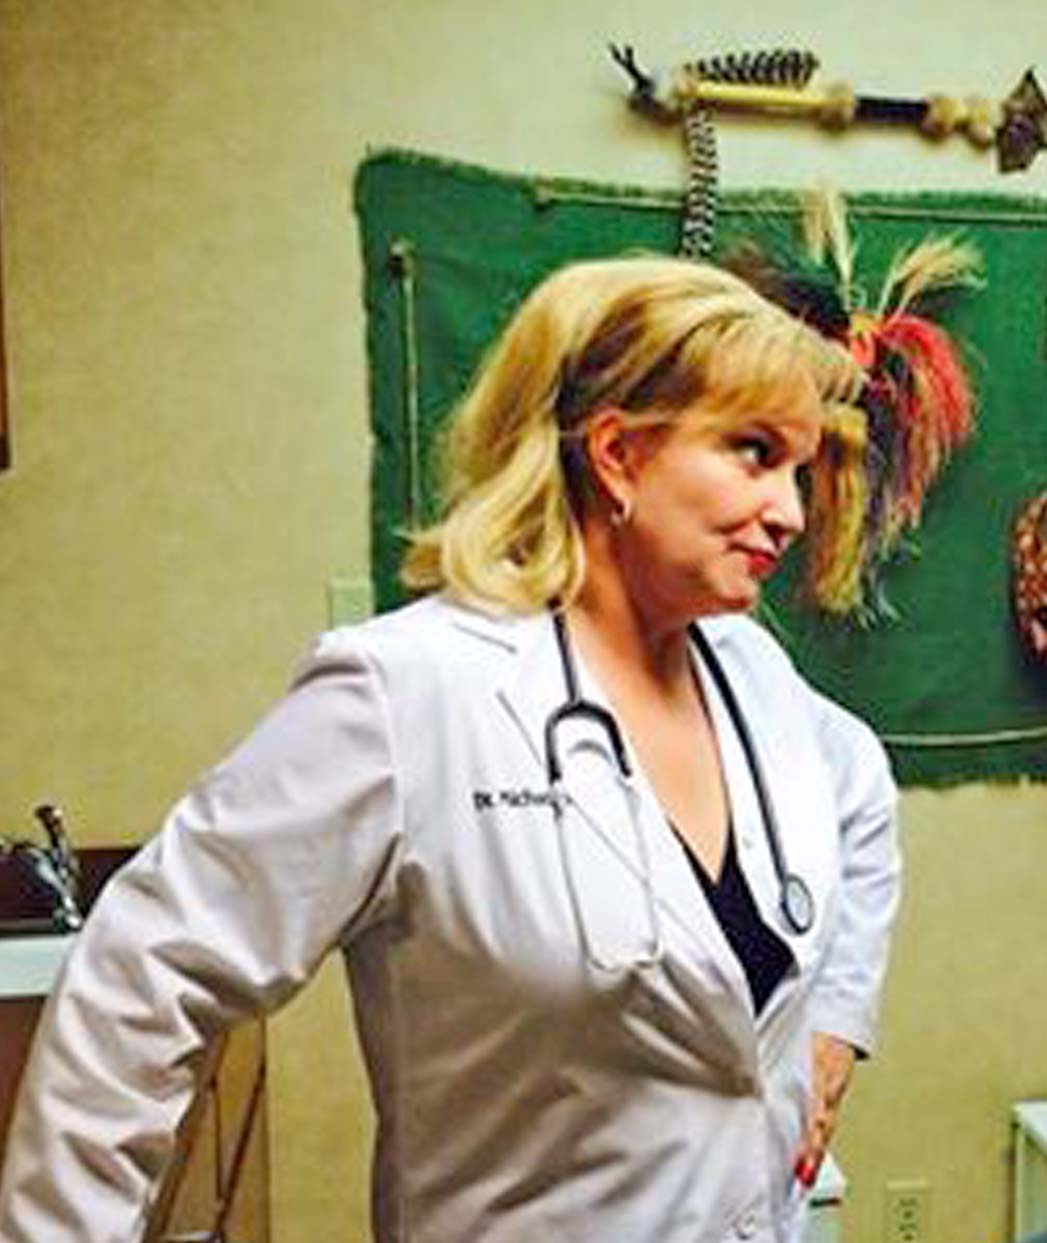 Barbara Ackles at the doctors office playing the role of Dr. Michael's in 